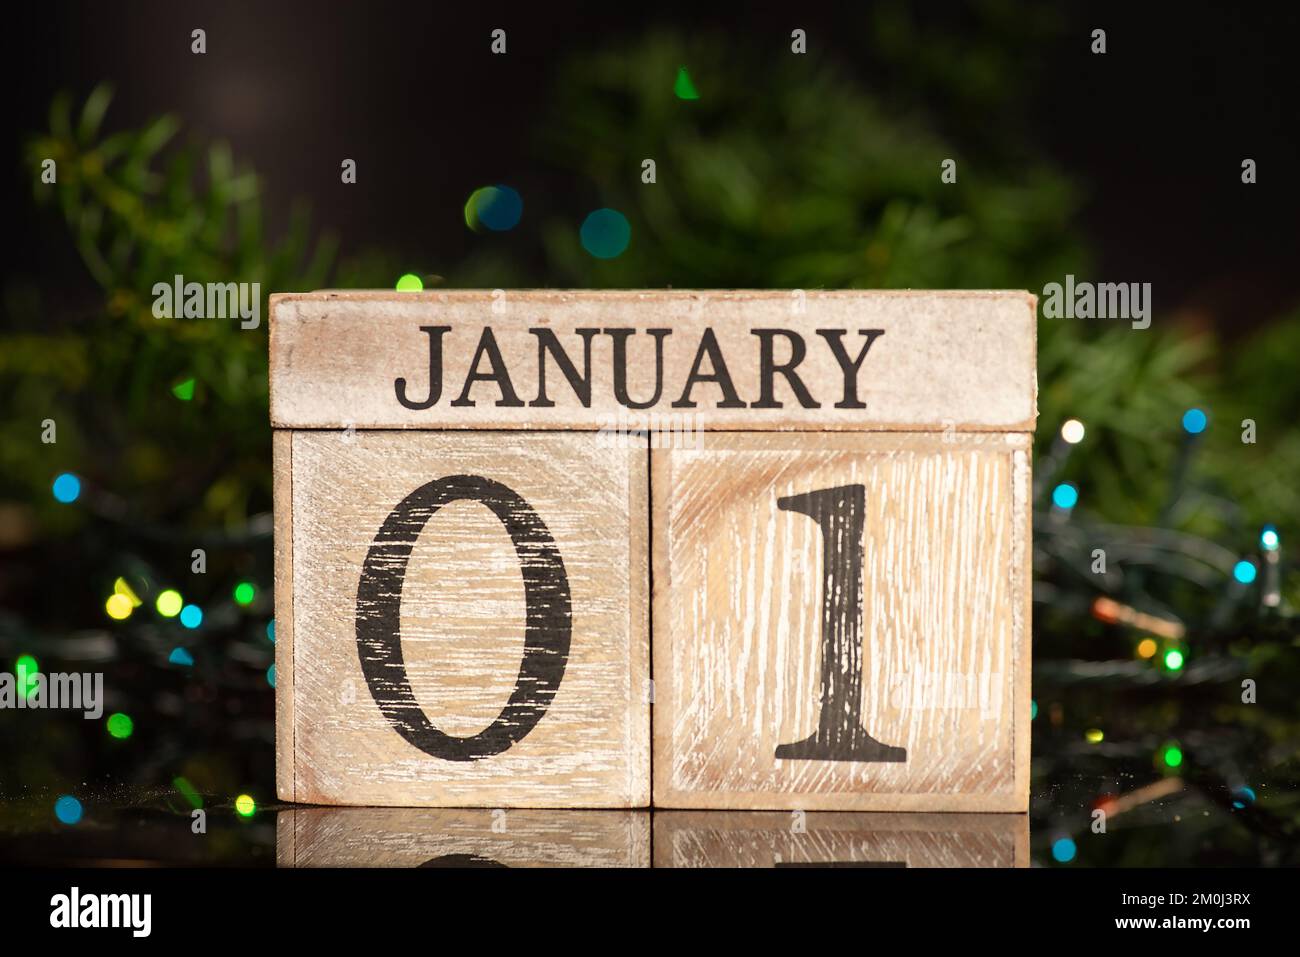 1st january sign for New Year's eve and Christmas tree winter holiday festive background and ornaments Stock Photo